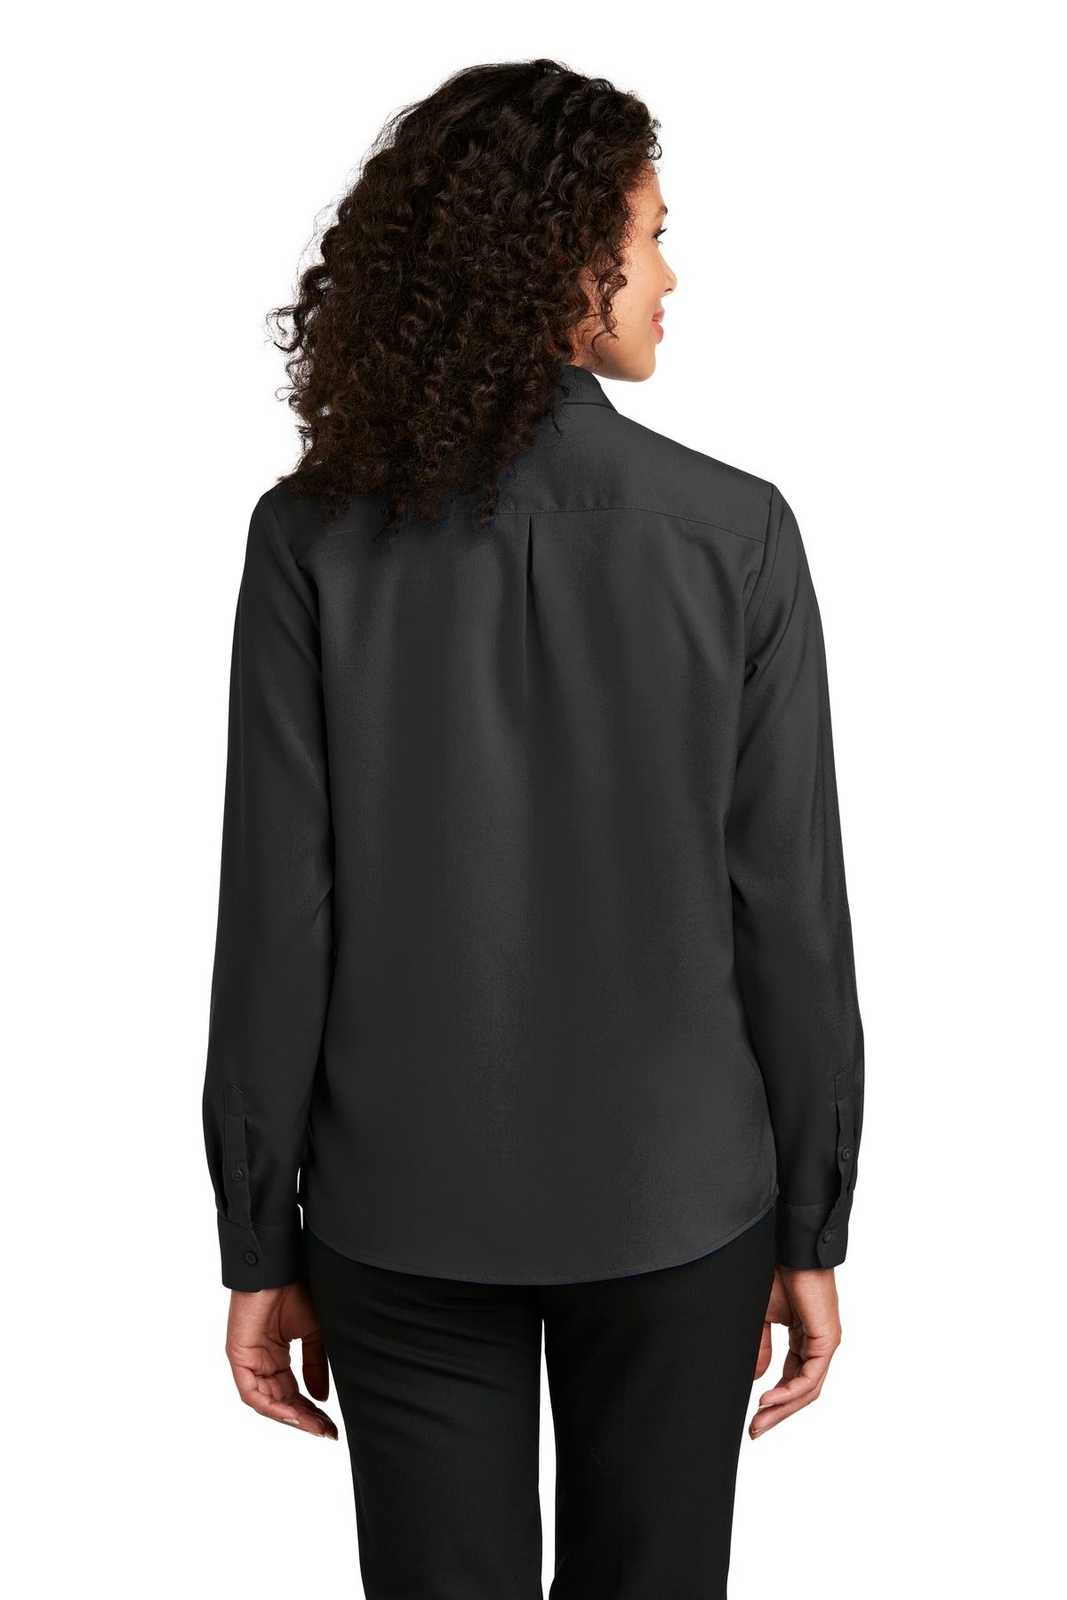 Port Authority LW401 Ladies Long Sleeve Performance Staff Shirt - Black - HIT a Double - 1